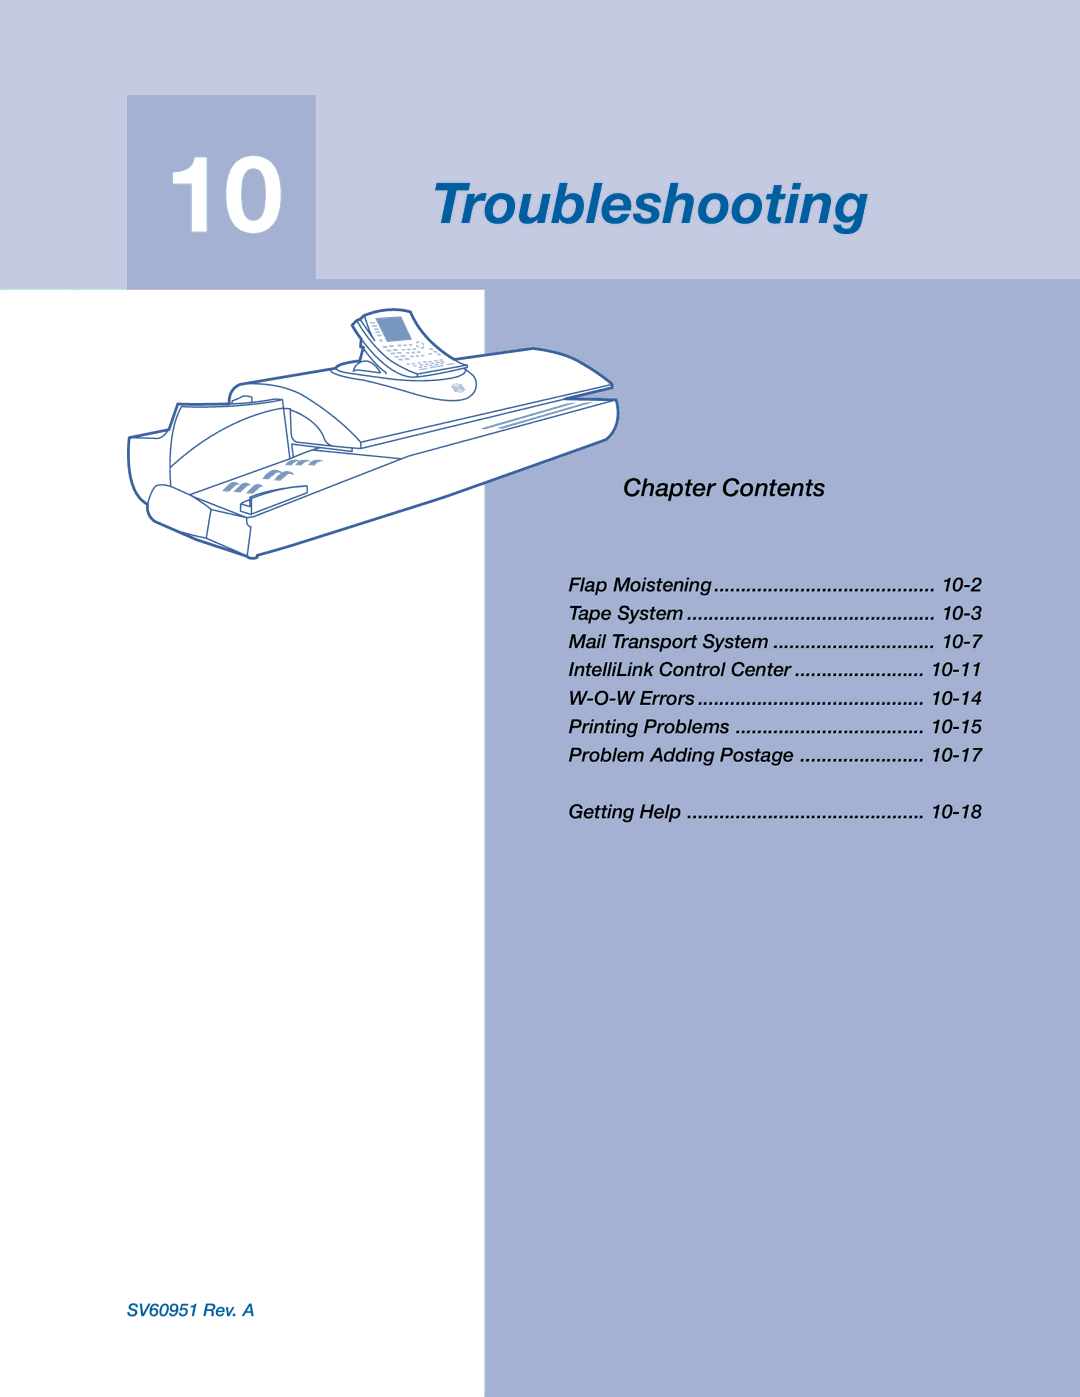 Pitney Bowes DM1000 manual Troubleshooting 